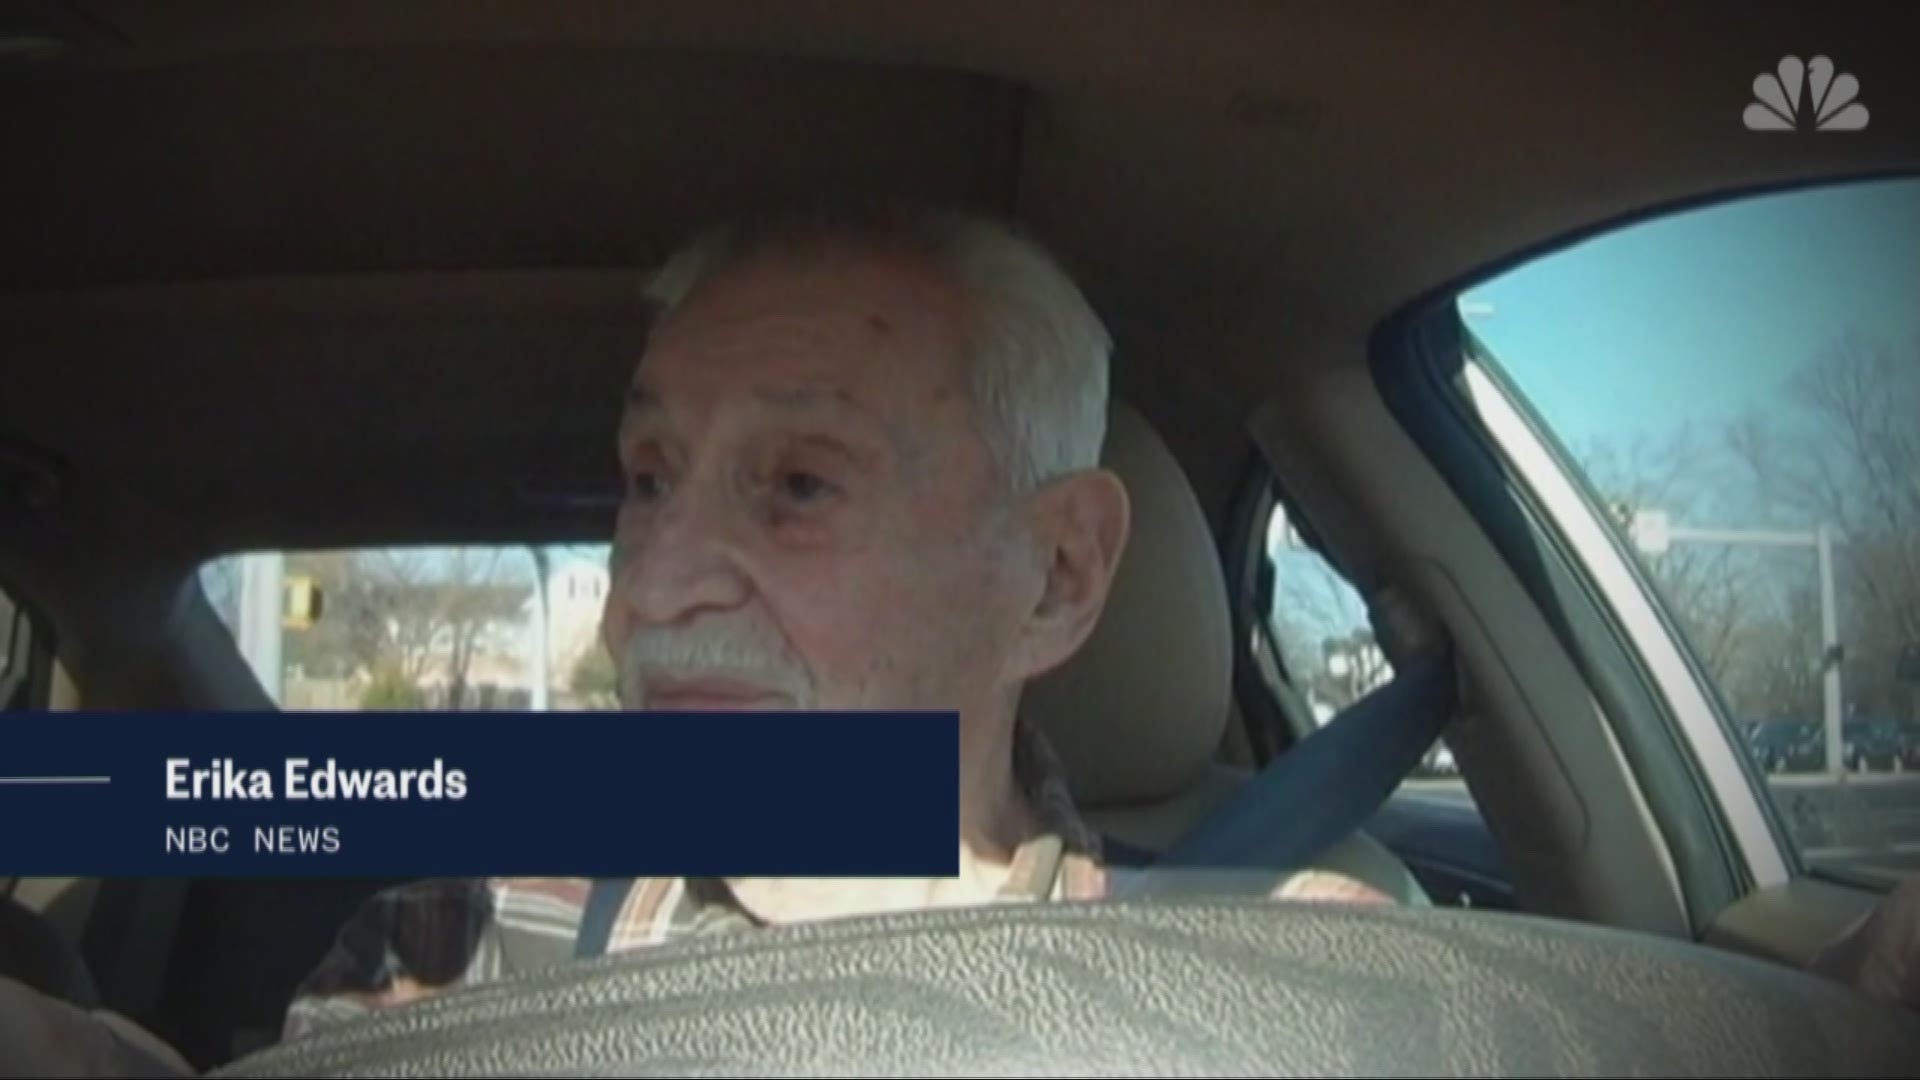 A new study from AAA is looking at how medication can impact the ability of older adults to drive safely. NBC's Erika Edwards reports.